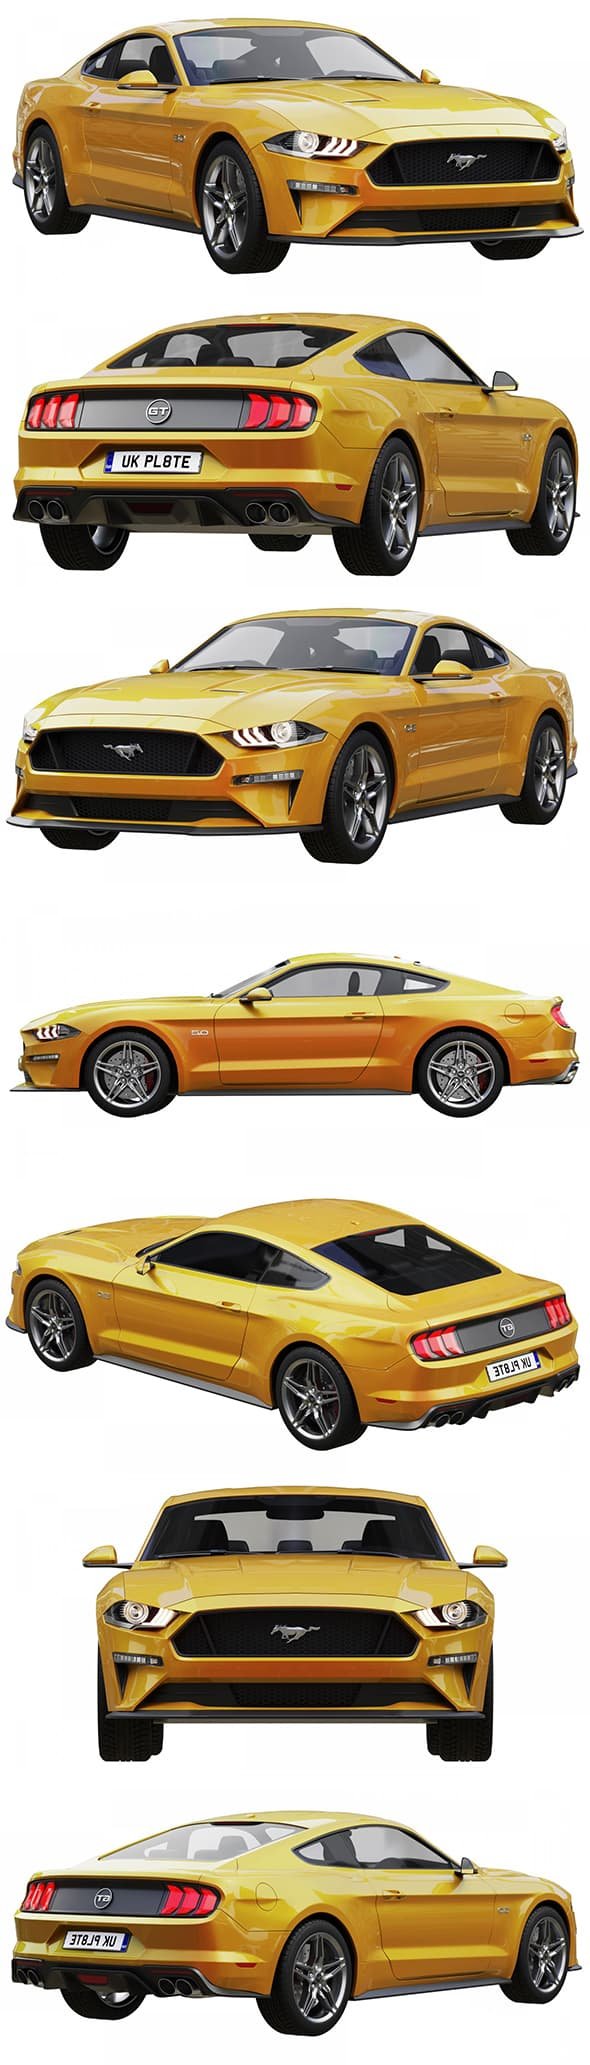 Ford Mustang Gt 2020 3D Model